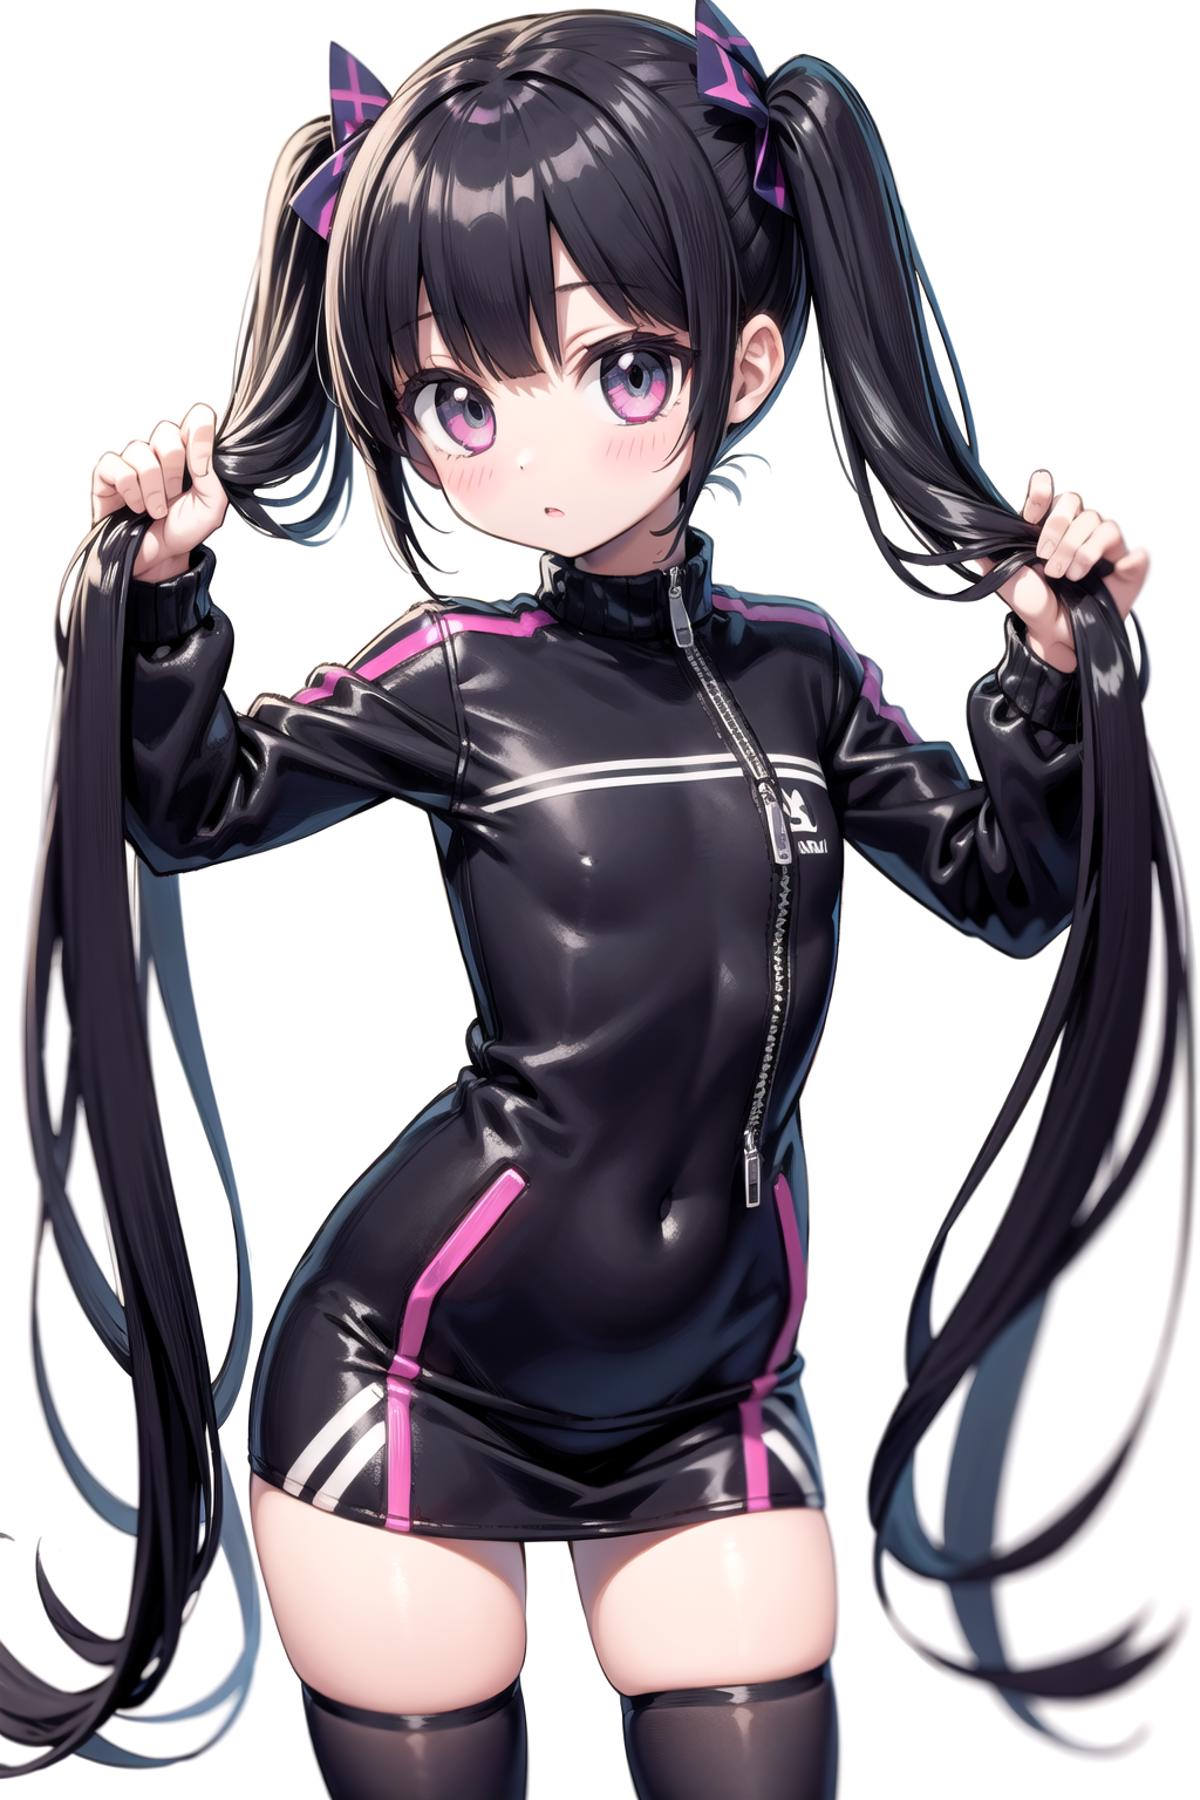 [Pose] Holding Twintails image by bombshell